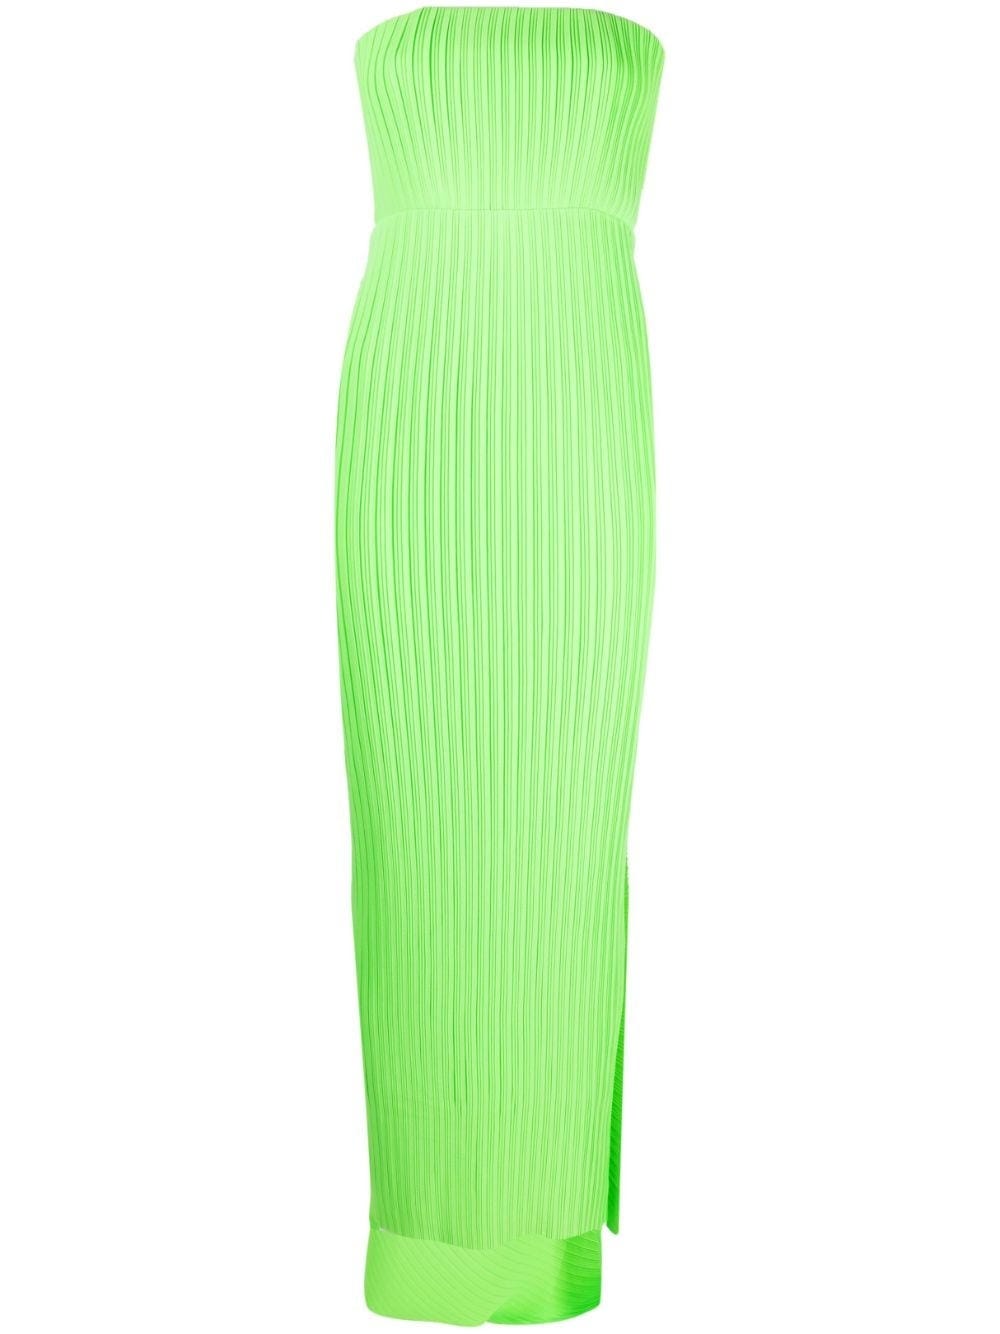 SOLACE LONDON GREEN STRAPLESS LONG DRESS WITH PLEATS